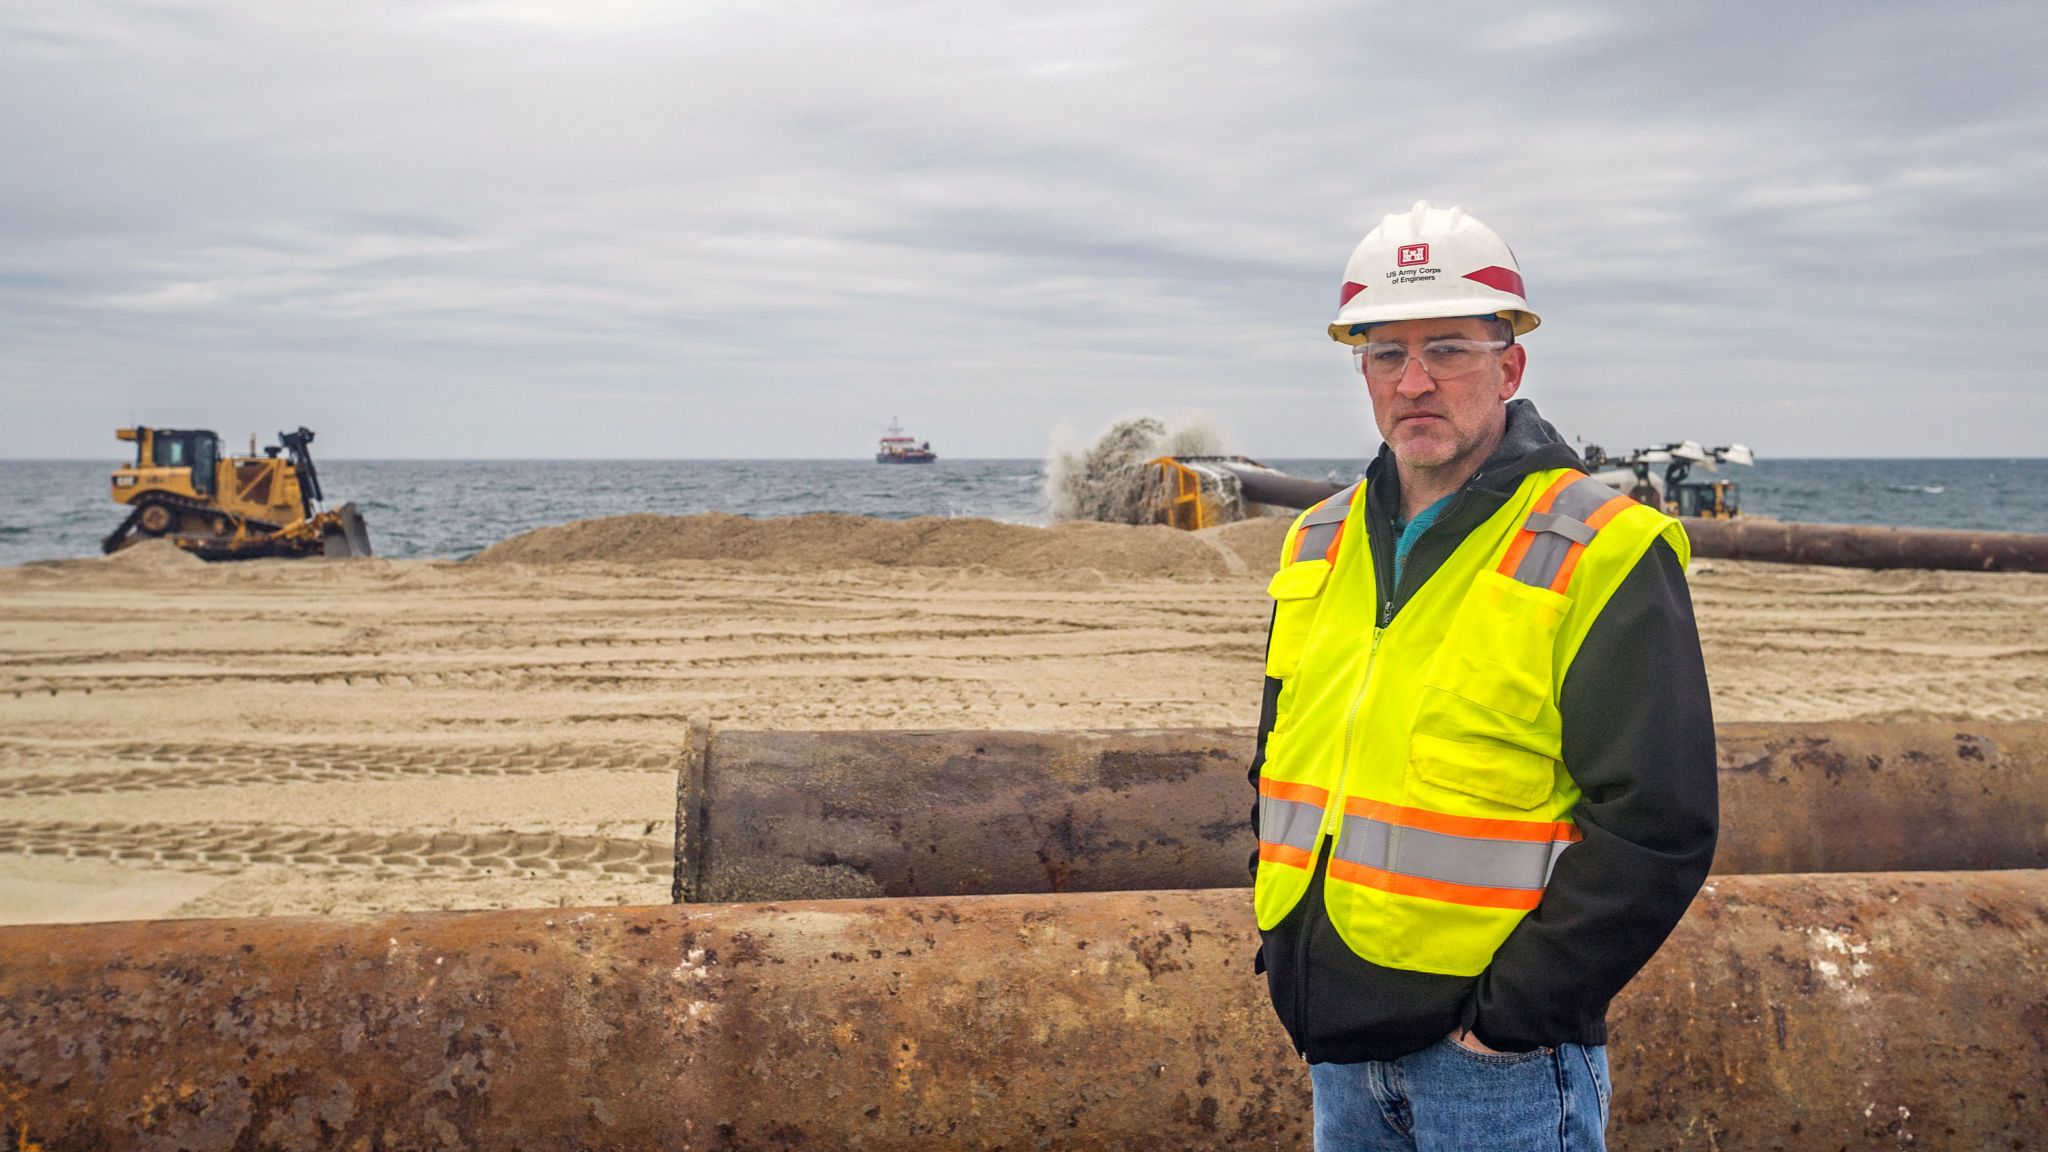 Jason Shea is the project manager for the beach renourishment initiative at Sea Bright. The dredge ship Magdalen is on the horizon. Image courtesy of NJ Spotlight. United States, undated.